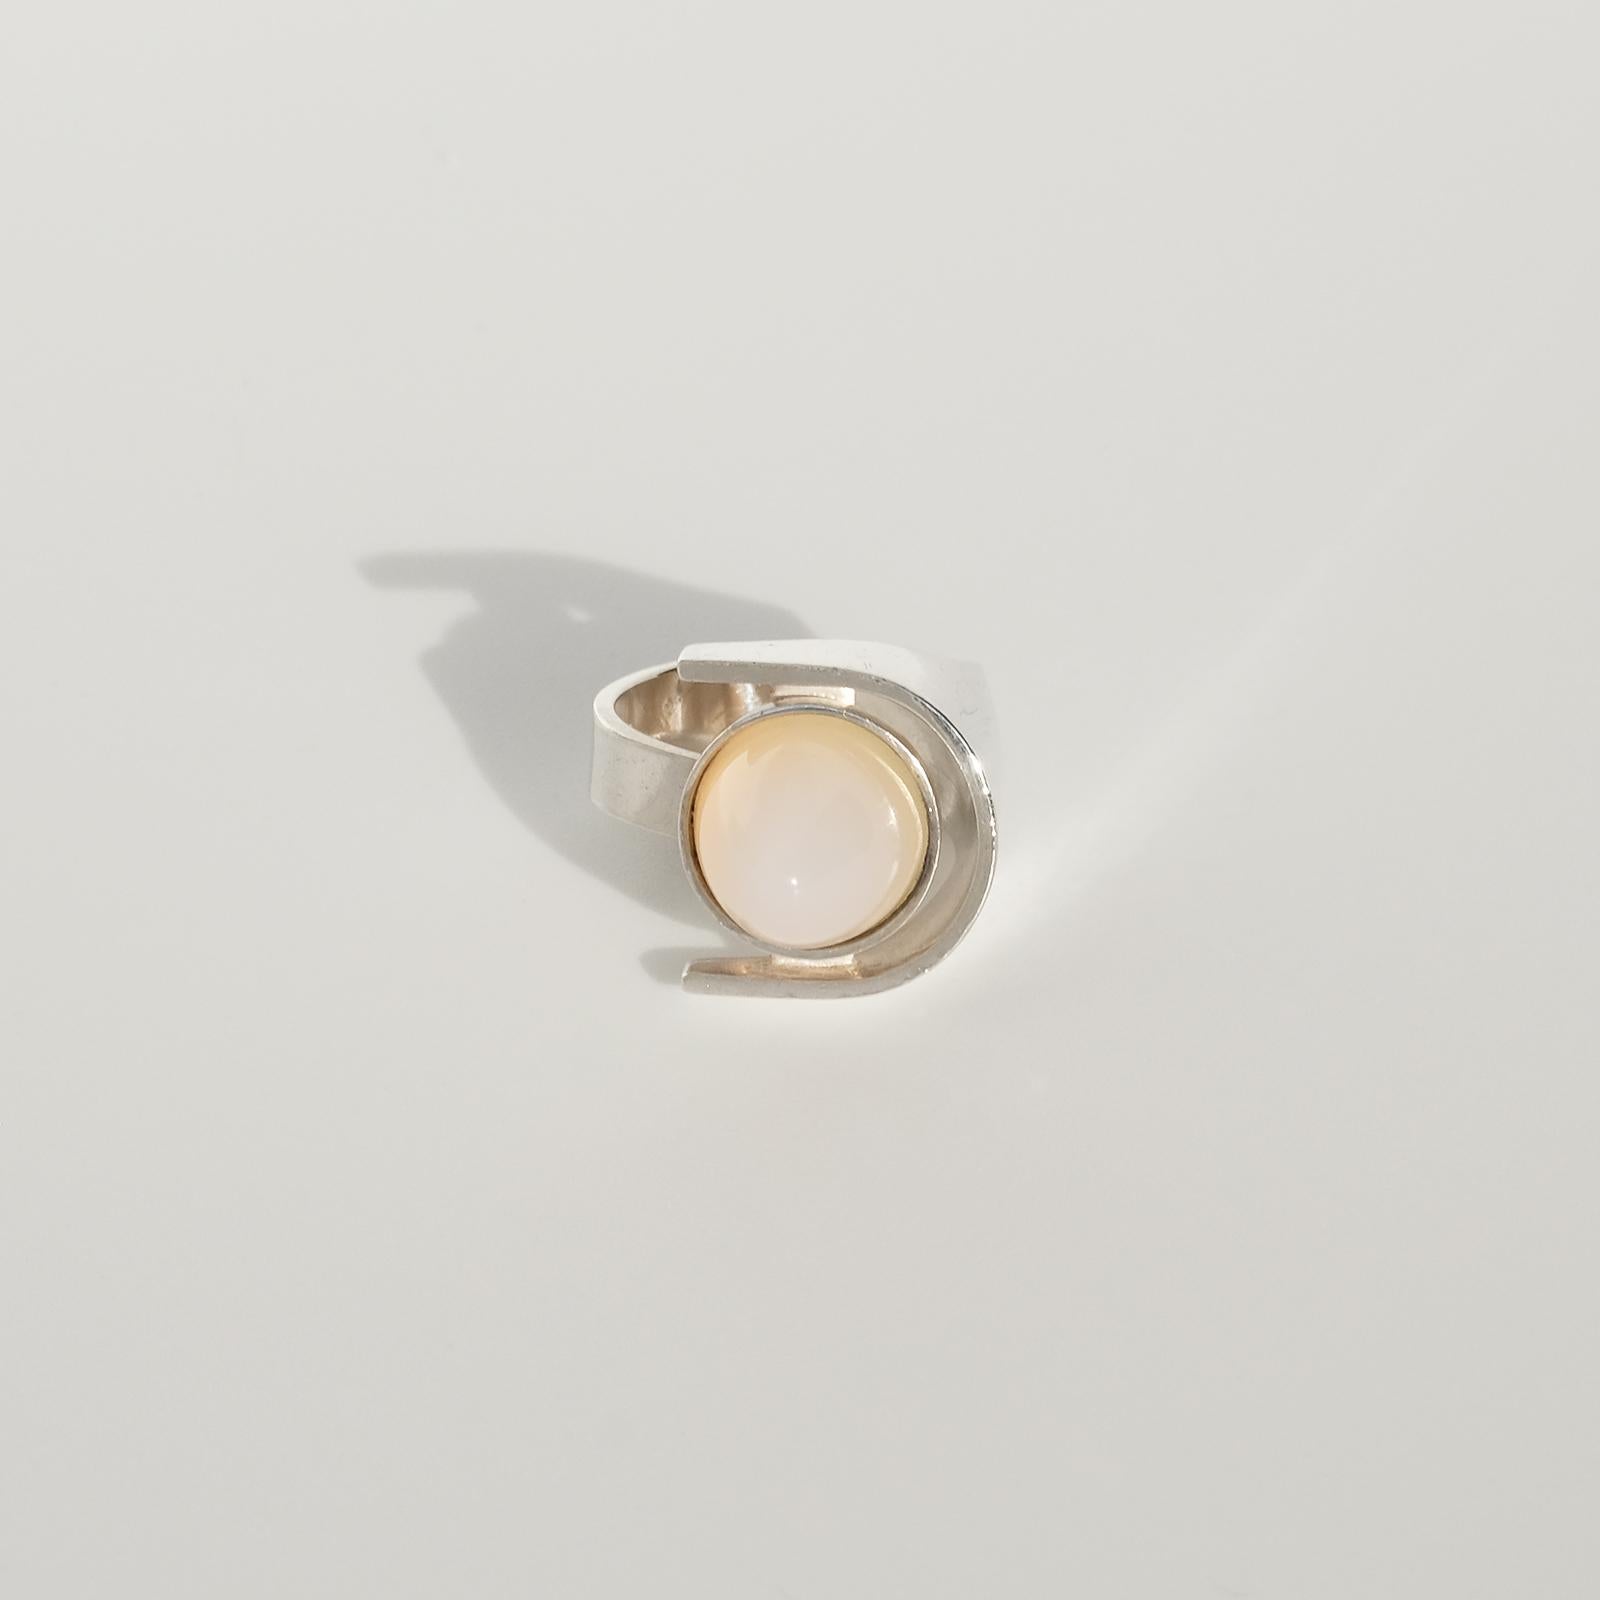 This modernist sterling silver ring is adorned with a high cabochon cut moonstone. The beautiful moonstone changes from blue-white transparent to light yellow depending on the light.

The shape of this ring can be described as embracing and out of